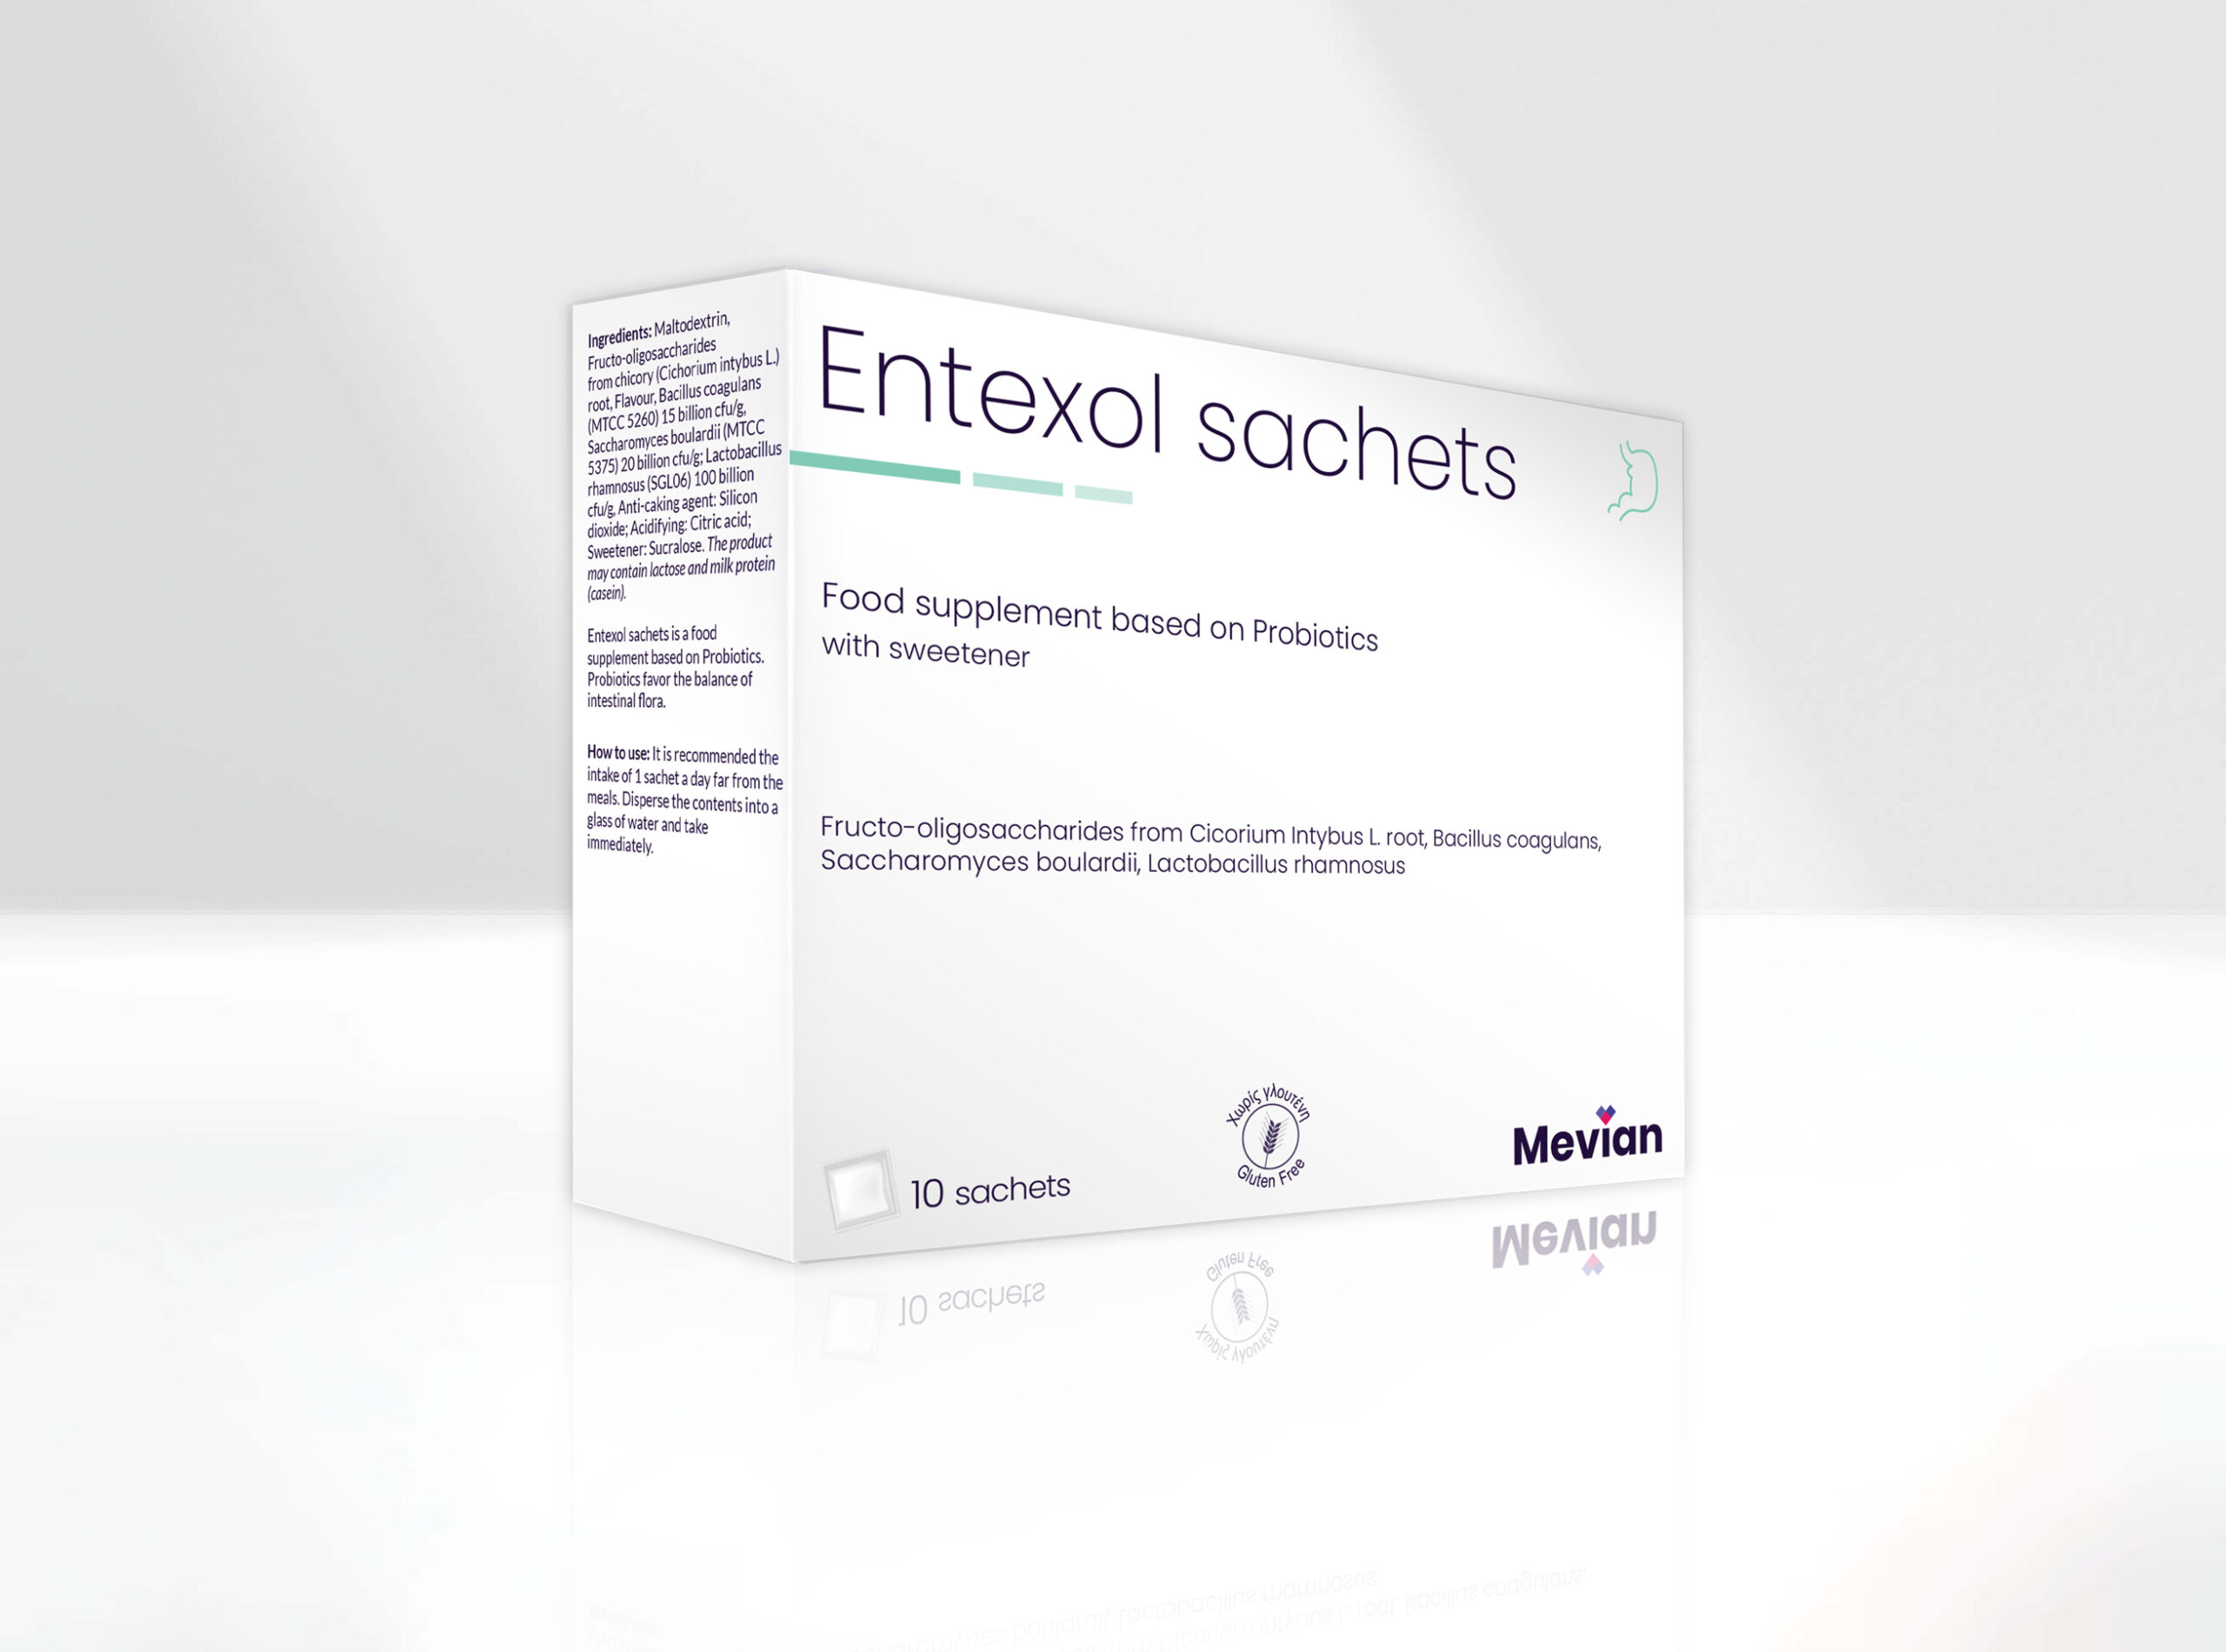 Entexol sachets improves digestion and assimilation, helps in cases of constipation and diarrhea.